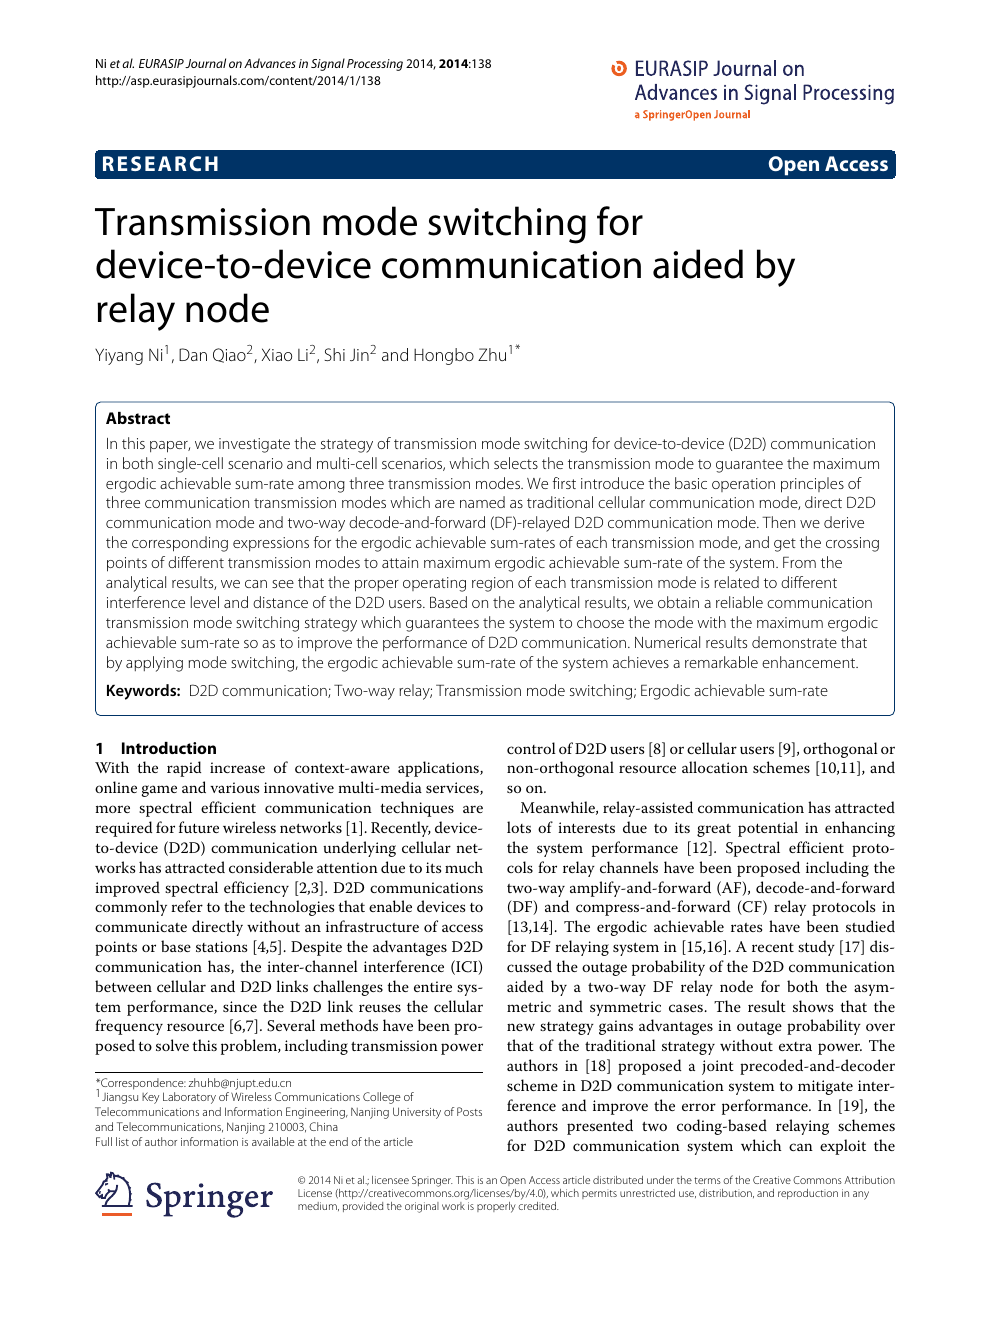 Transmission Mode Switching For Device To Device Communication Aided By Relay Node Topic Of Research Paper In Nano Technology Download Scholarly Article Pdf And Read For Free On Cyberleninka Open Science Hub